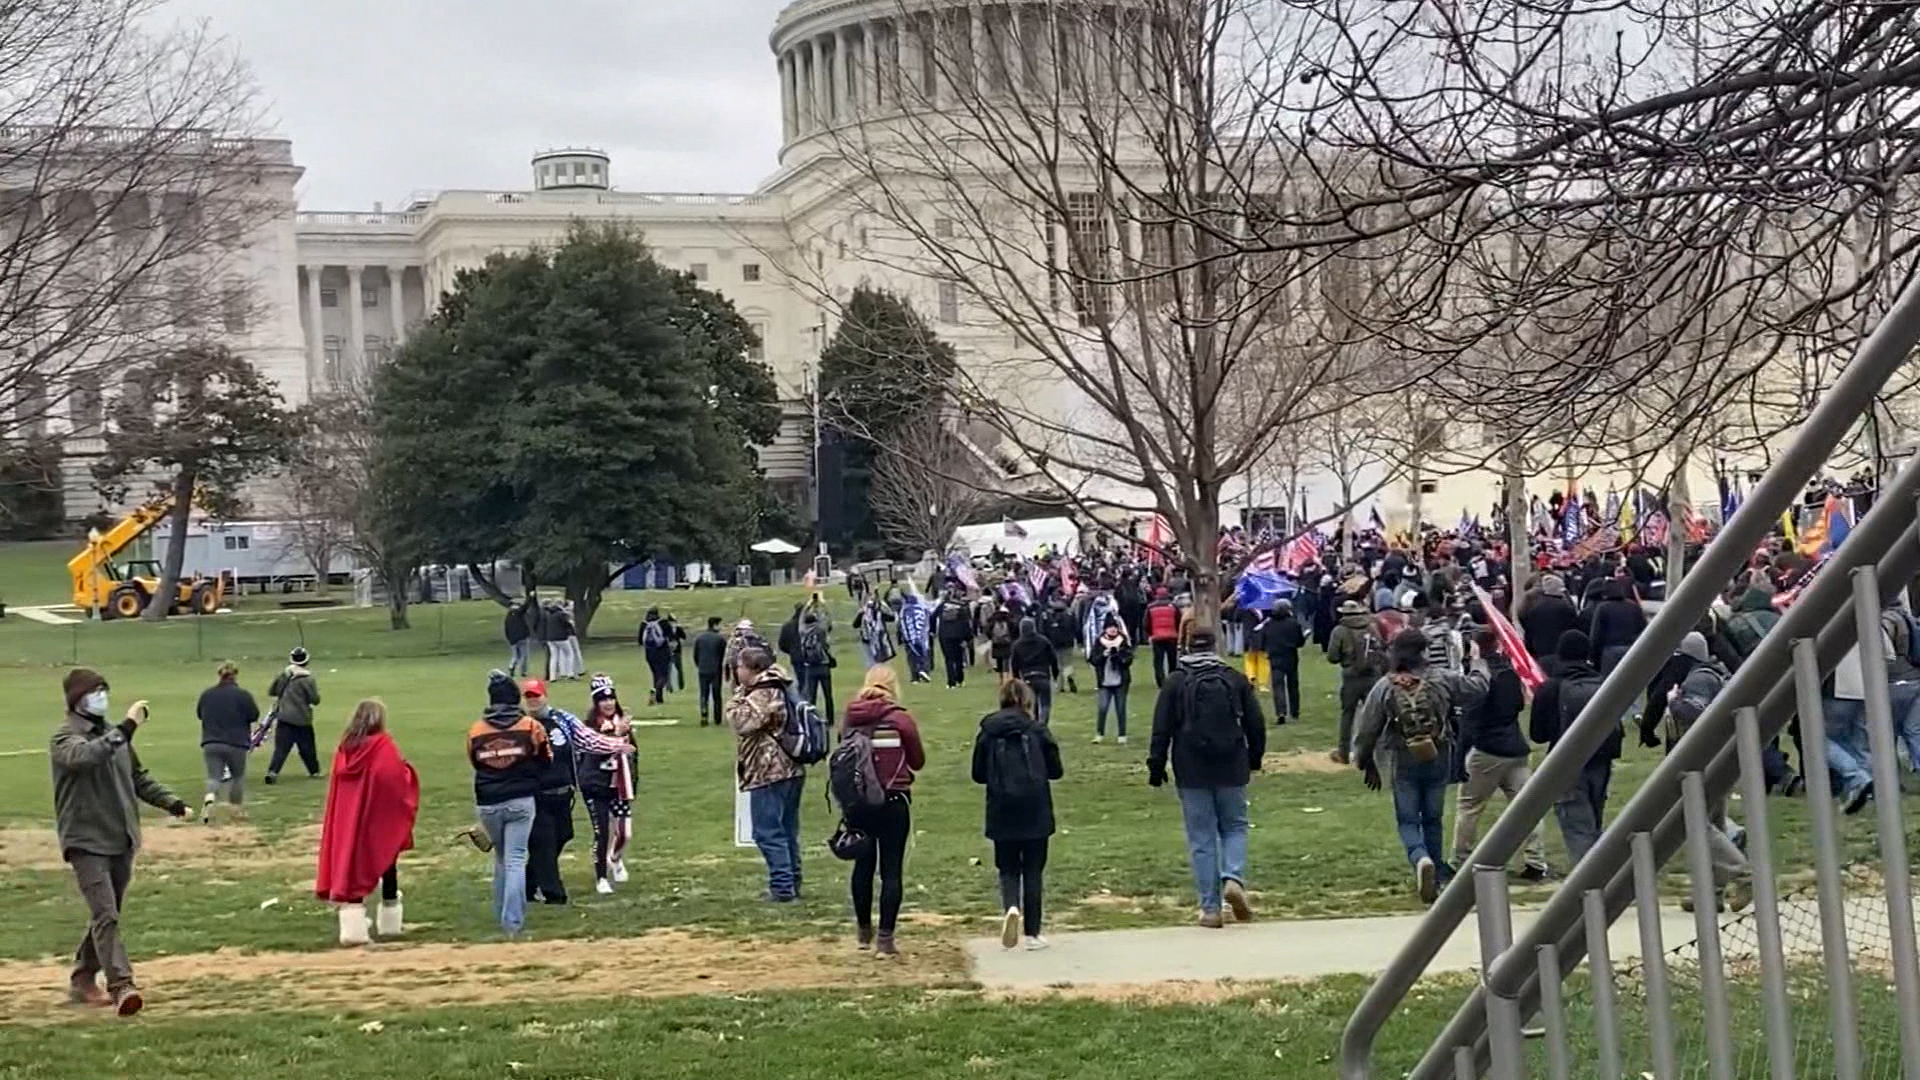 VIDEO Protestors descend on U.S. Capitol, here's what happened